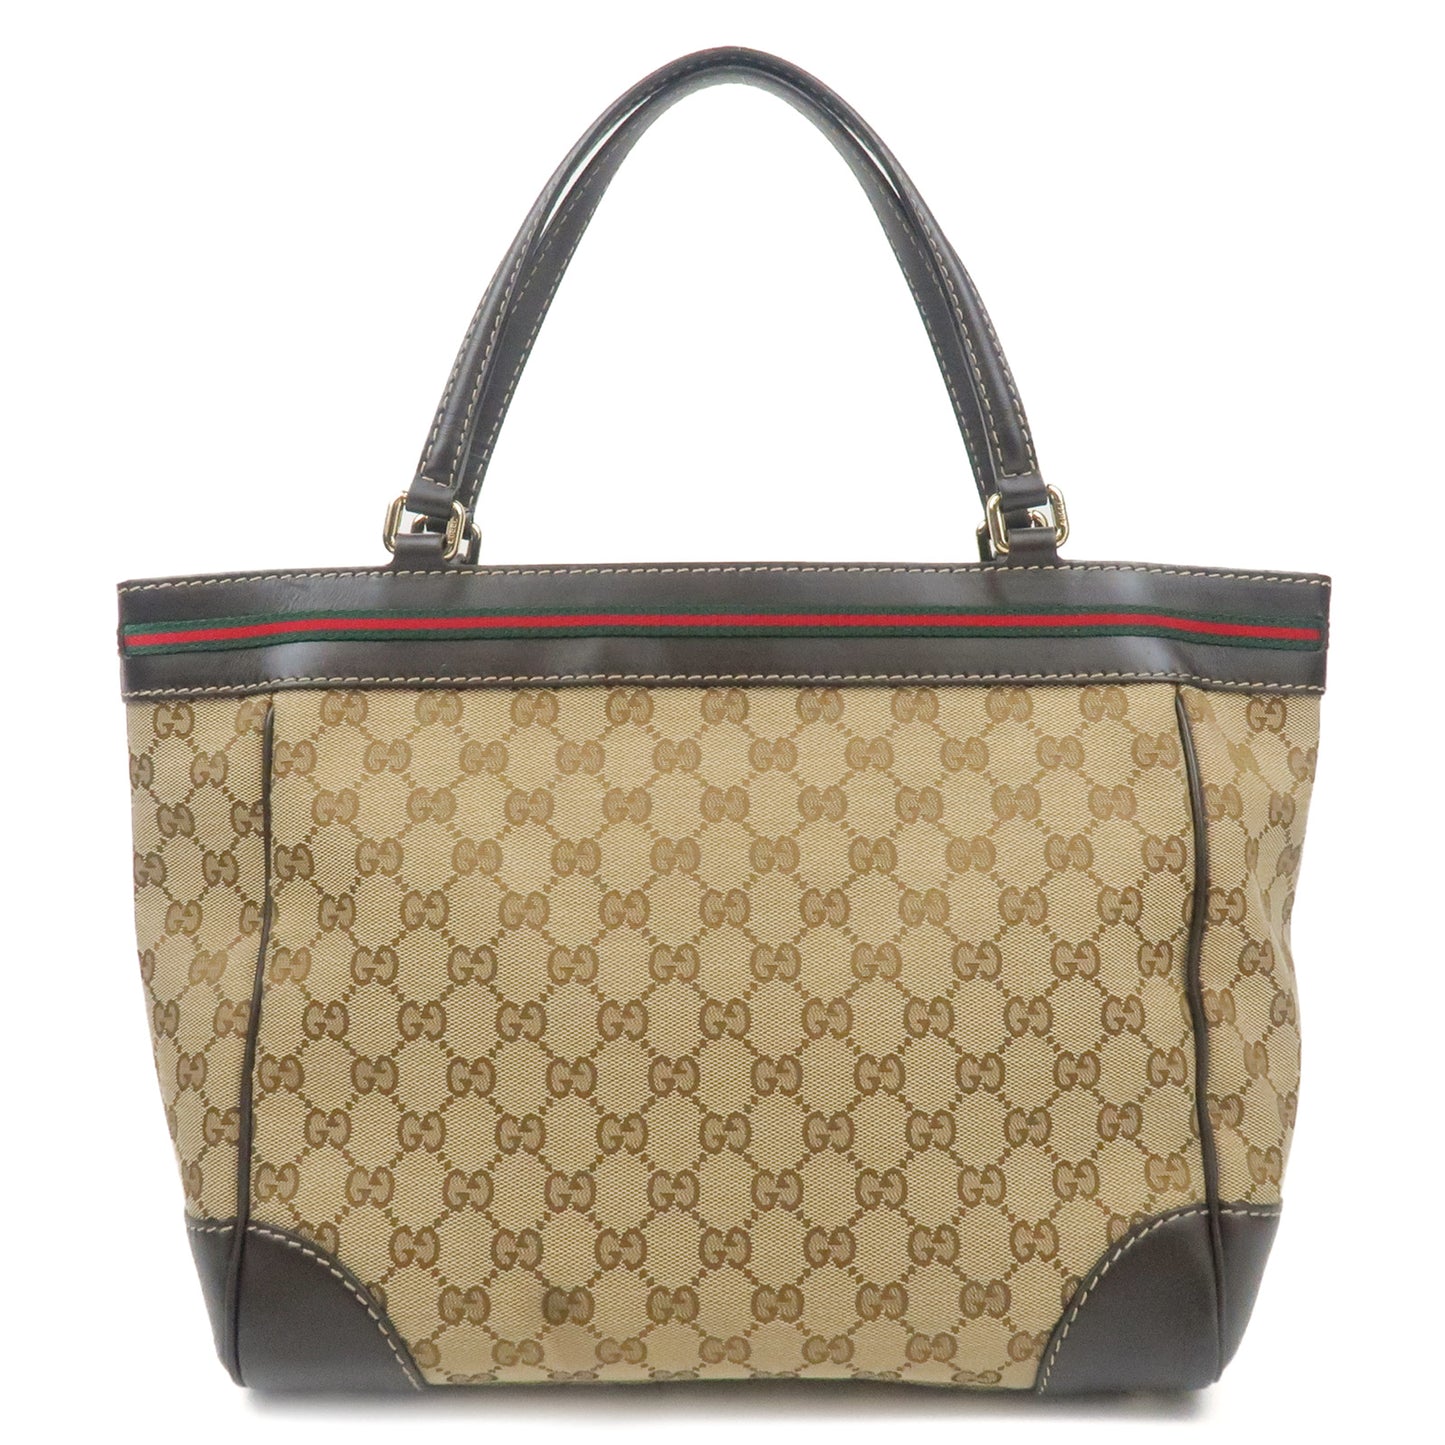 GUCCI Sherry Mayfair GG Canvas Leather Tote Bag Beige 257061